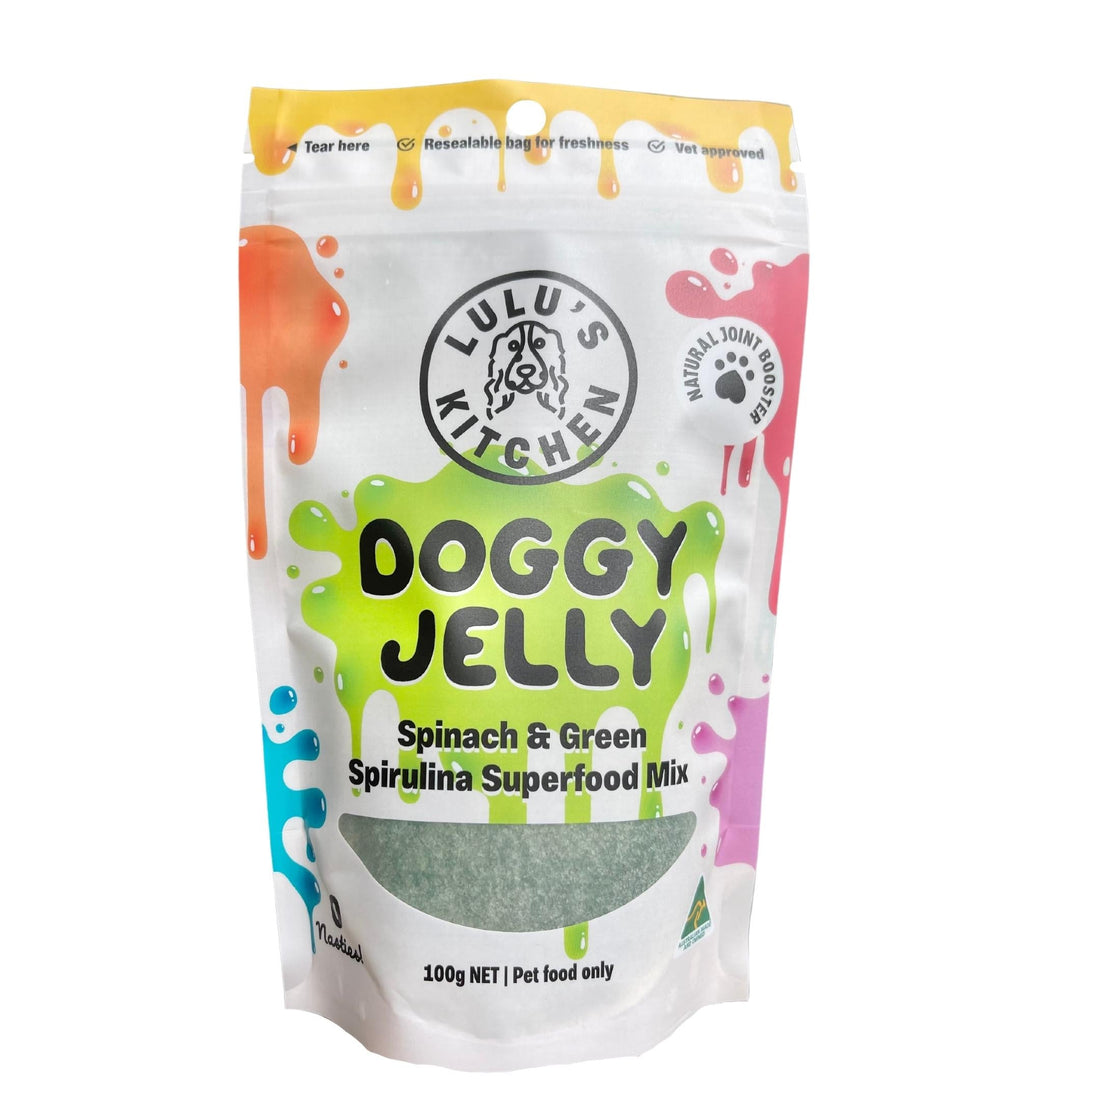 Doggy Superfood Jelly